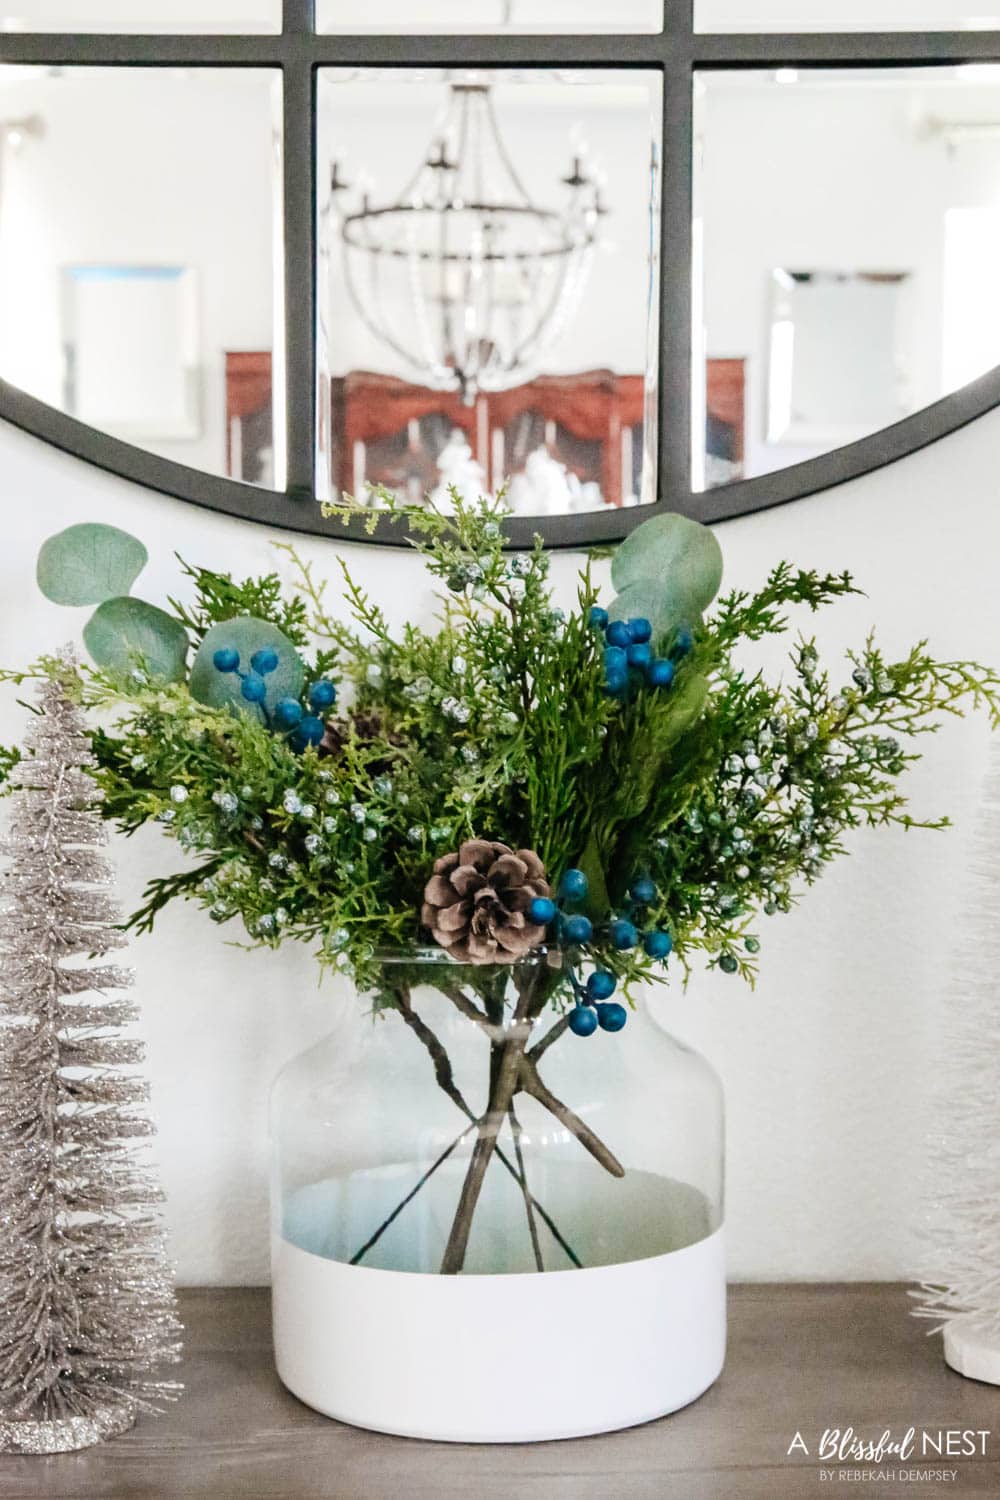 Juniper stems in a white vase on a entry table.